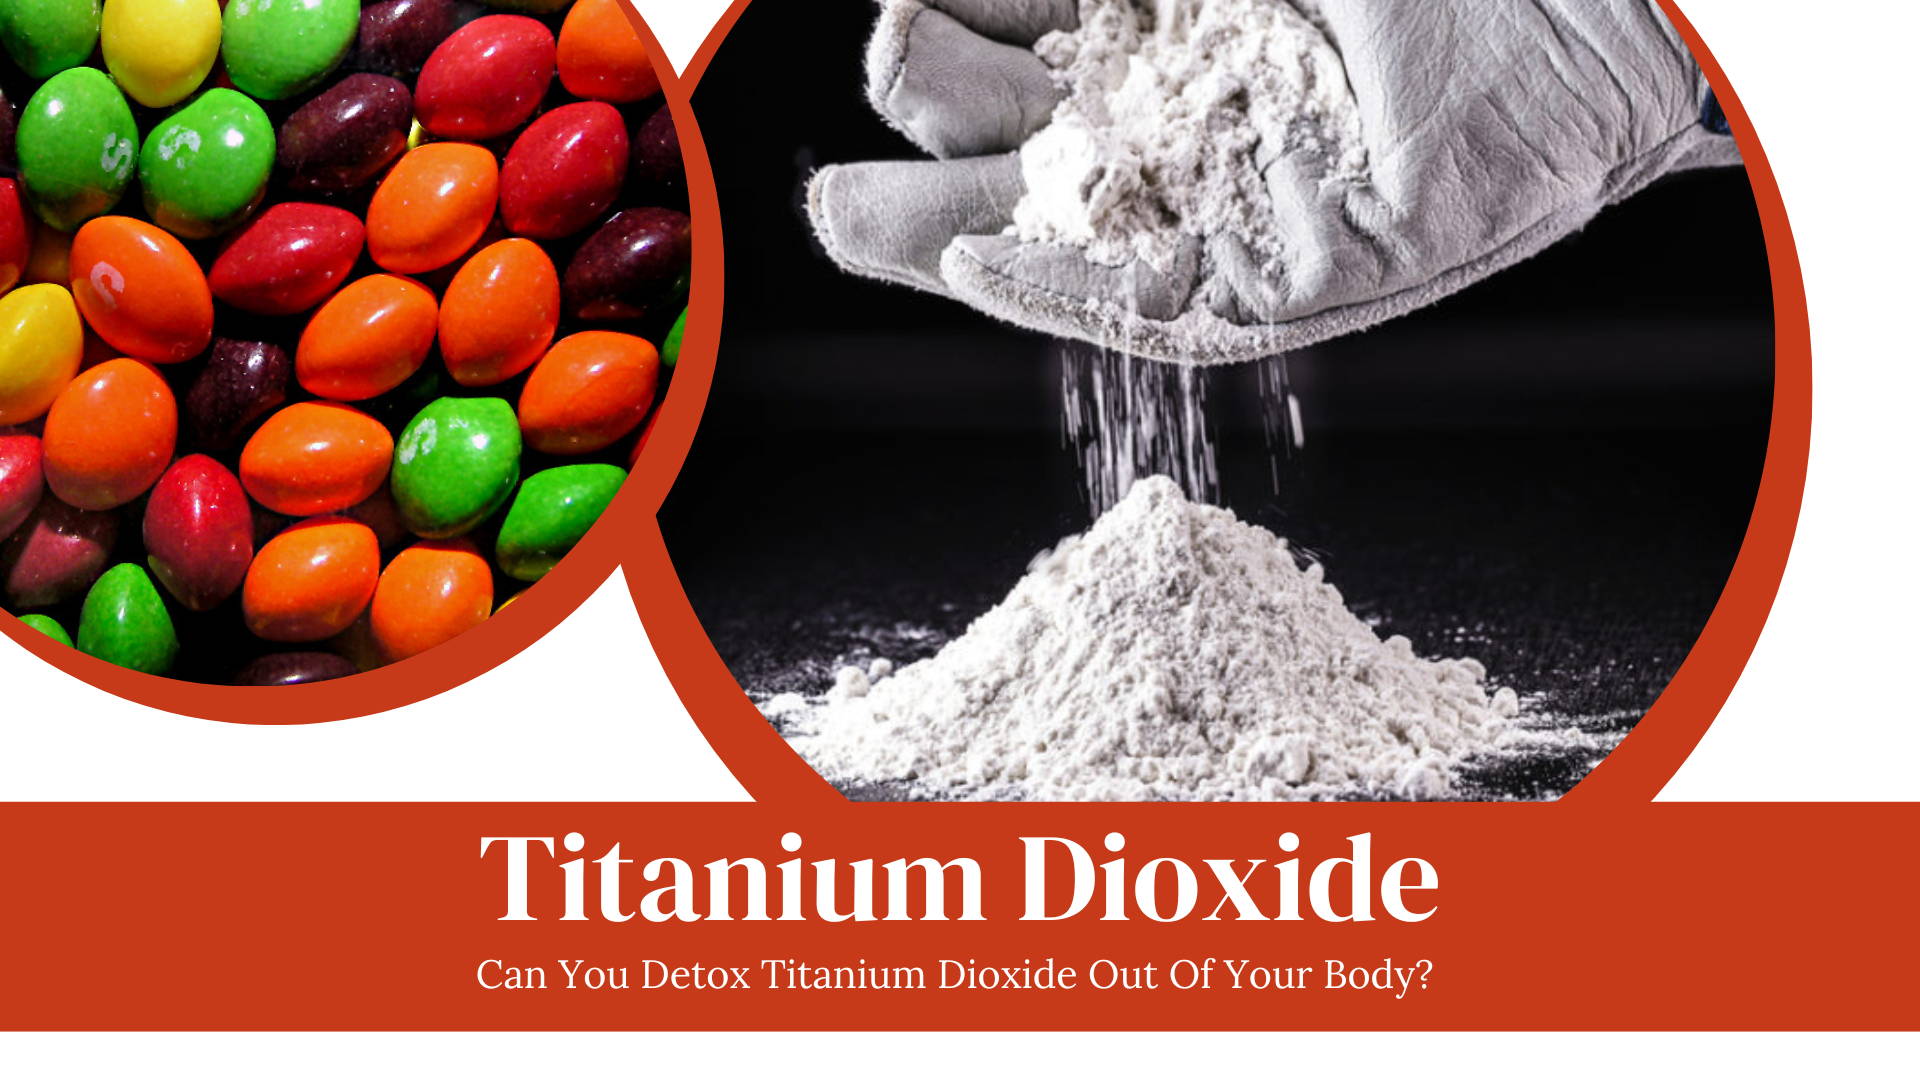 Can you detox titanium dioxide out of your body?